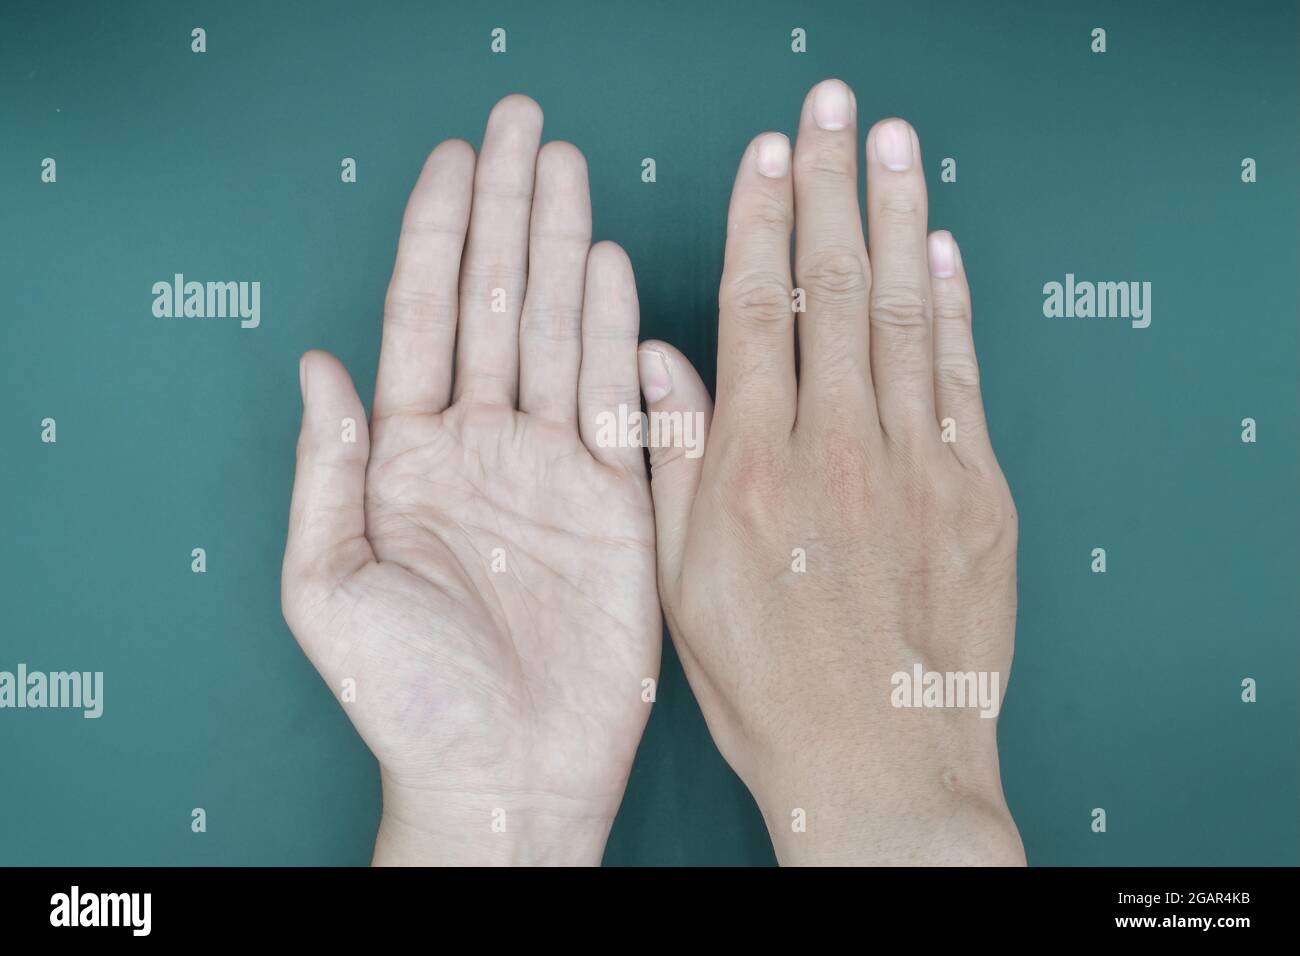 Pale palmar surface of both hands. Anaemic hands of Asian, Chinese man. Isolated on green background. Stock Photo